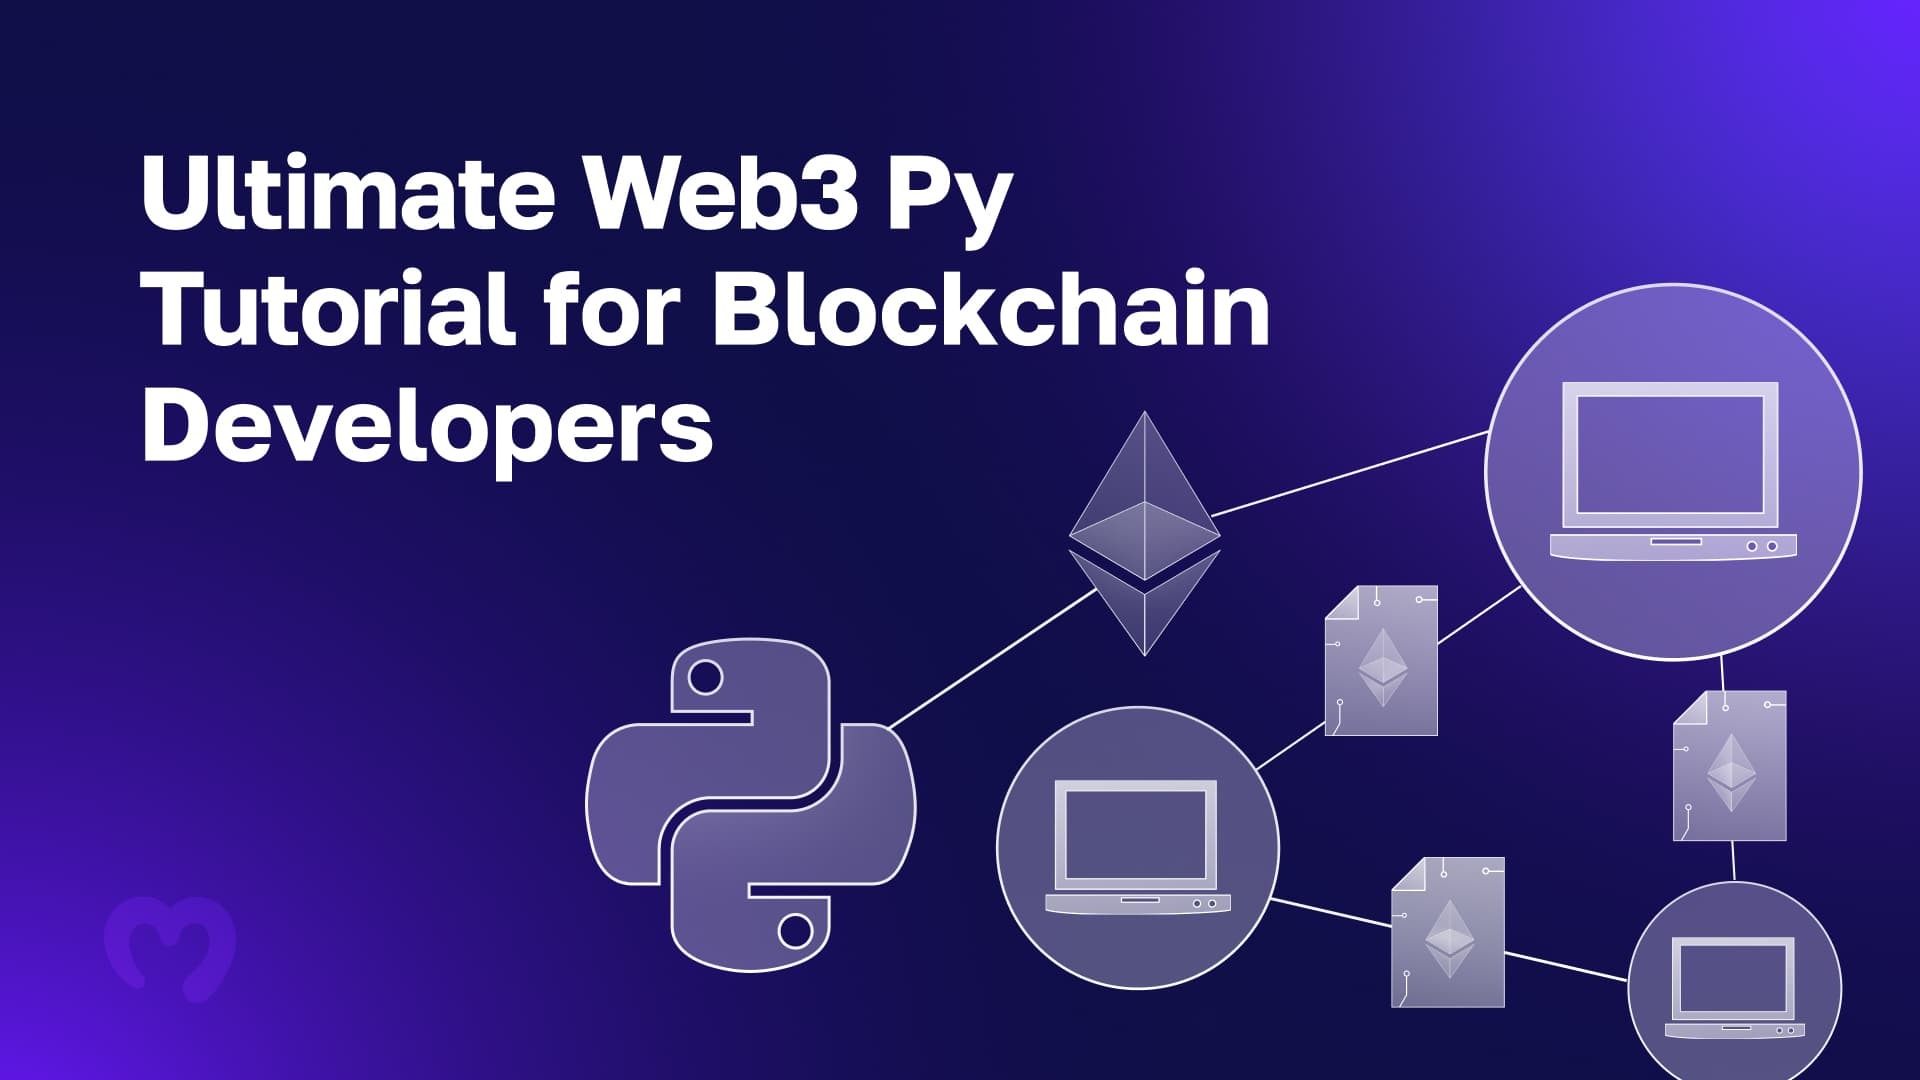 Exploring the Ultimate Web3 Py Tutorial for Developers in Blockchain